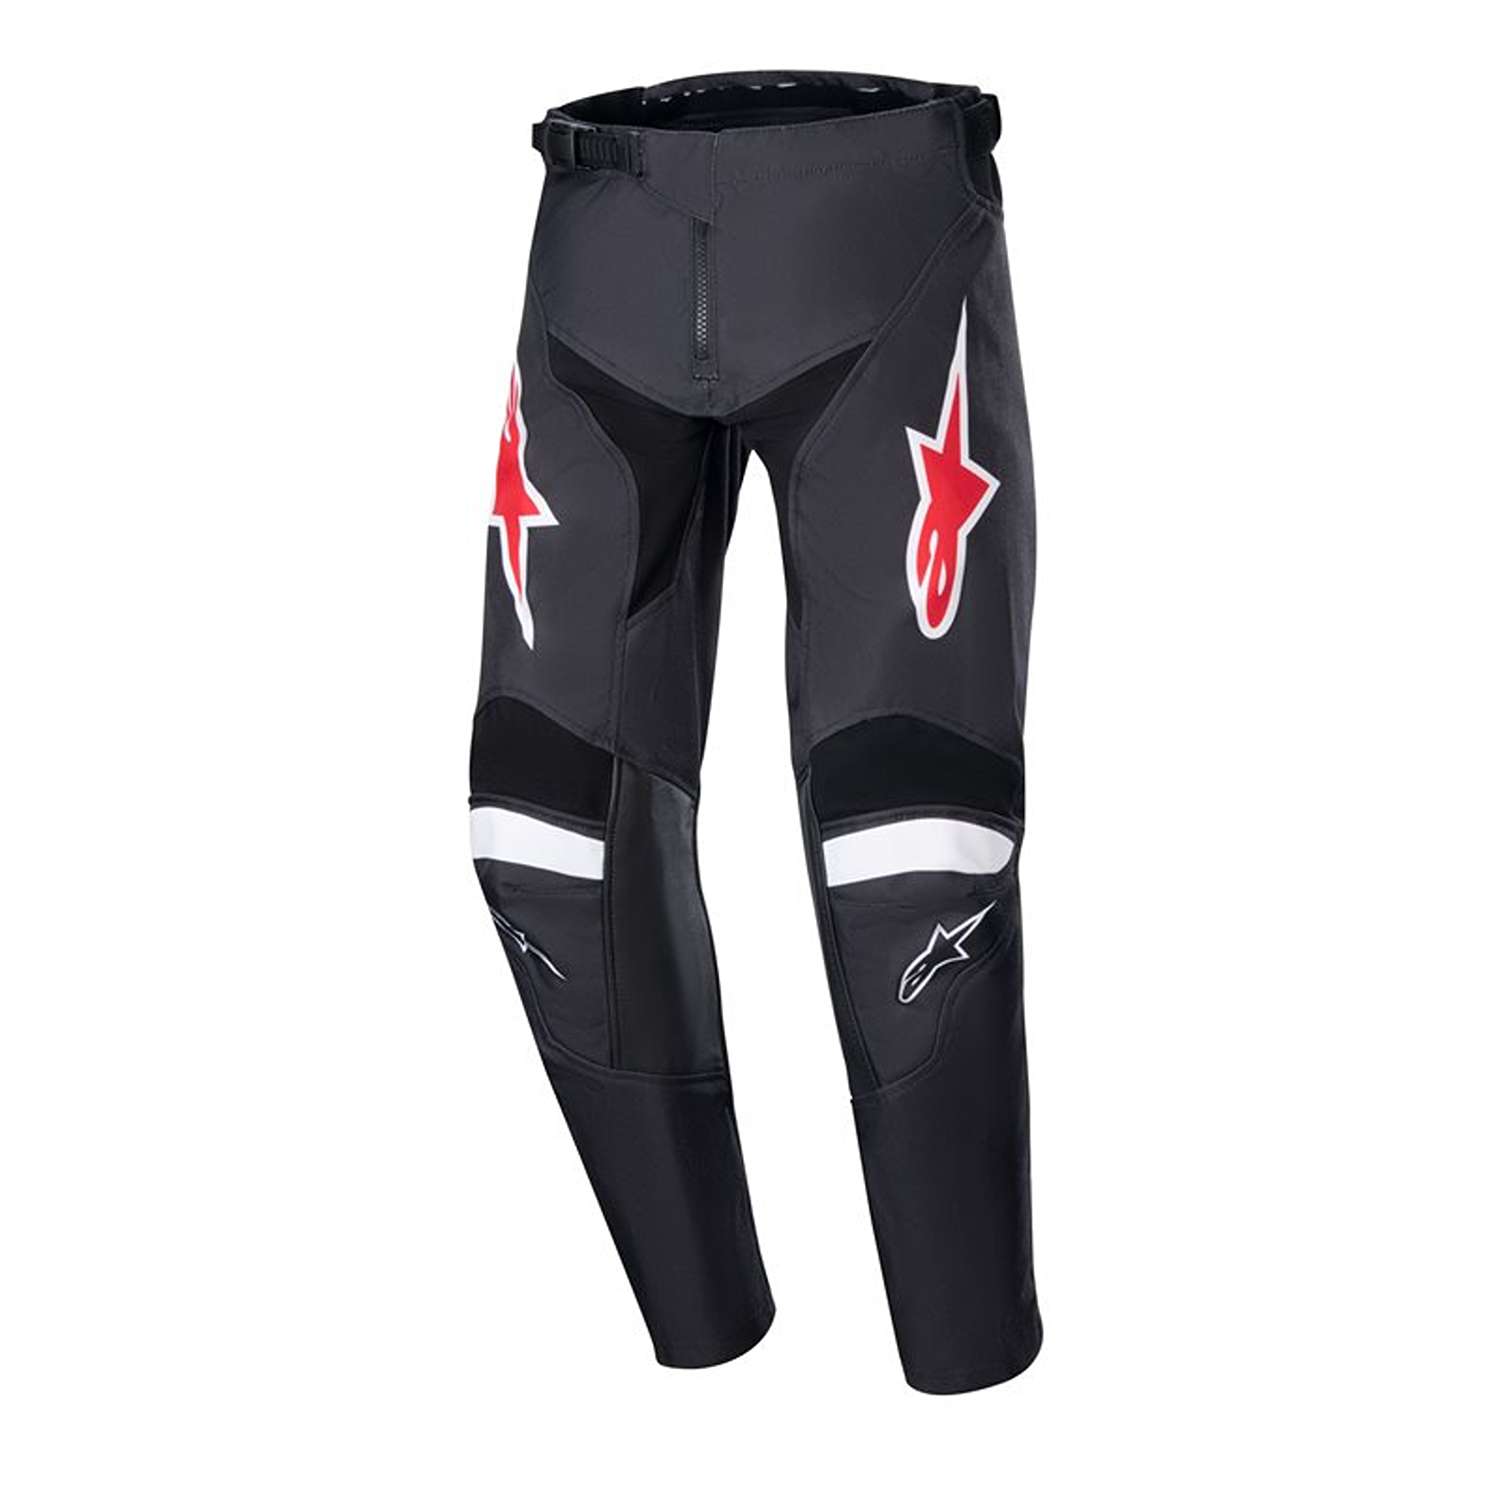 Image of EU Alpinestars Youth Racer Lucent Pants Black White Taille 24